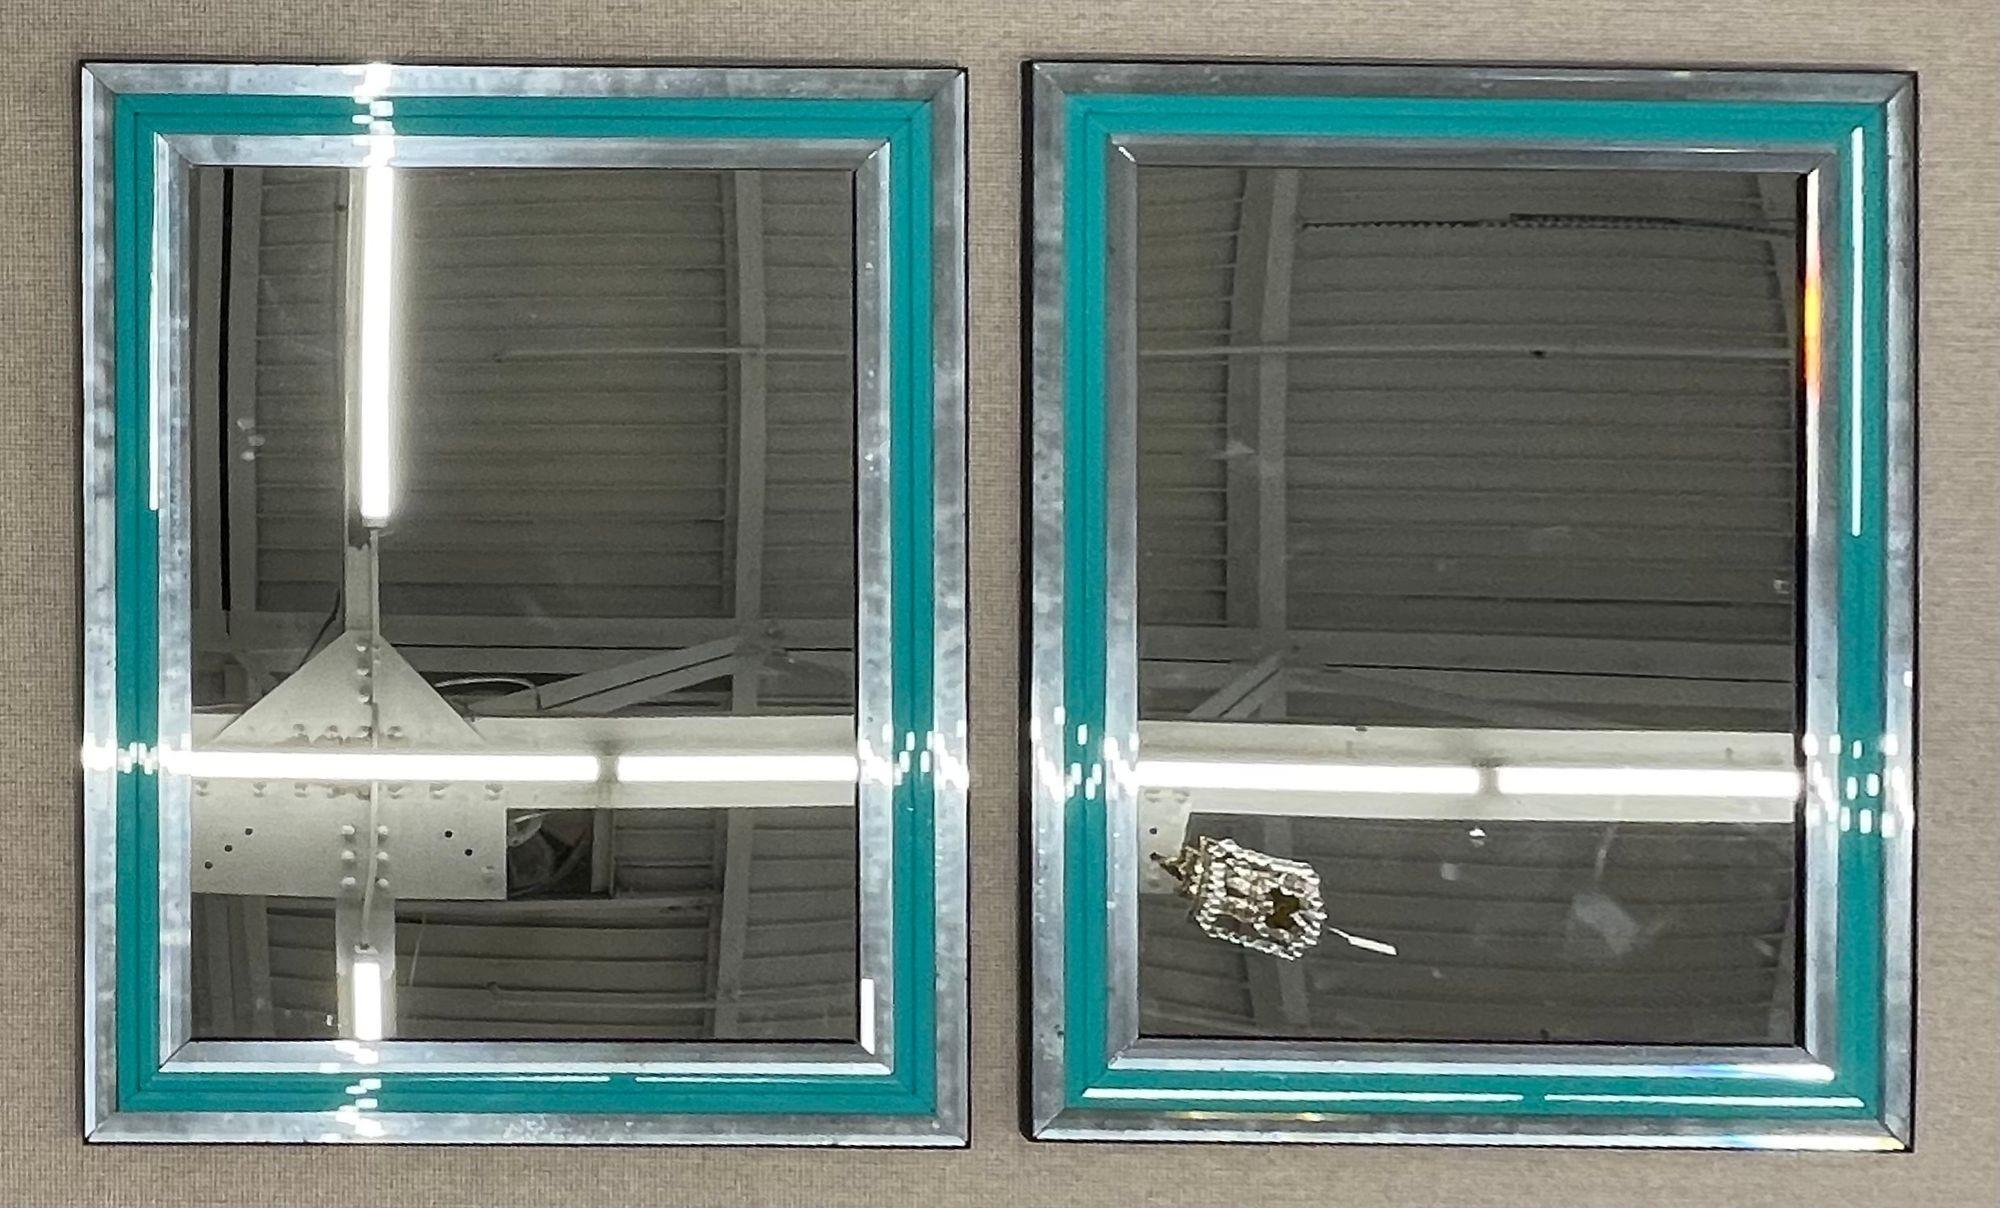 Pair of Art Deco Wall, Mantle, Console or Pier Mirrors with Turquoise Beveled Frames inside Clean Mirrored Beveled Panels.
 
A pair of large and impressive stunning monumental Art Deco style wall, console or pier mirrors with beveled frames. Each